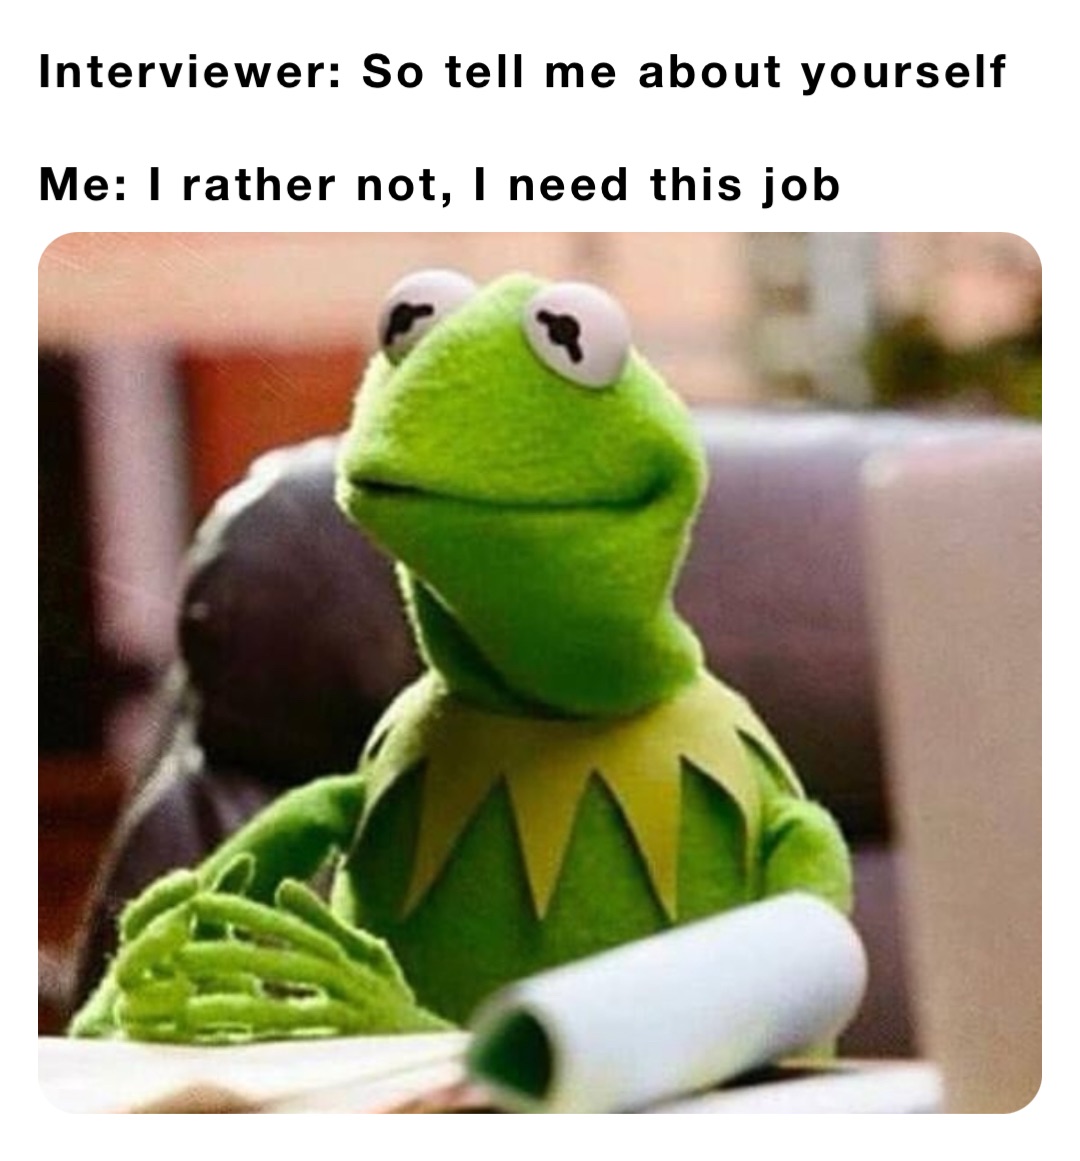 Interviewer: So tell me about yourself 

Me: I rather not, I need this job